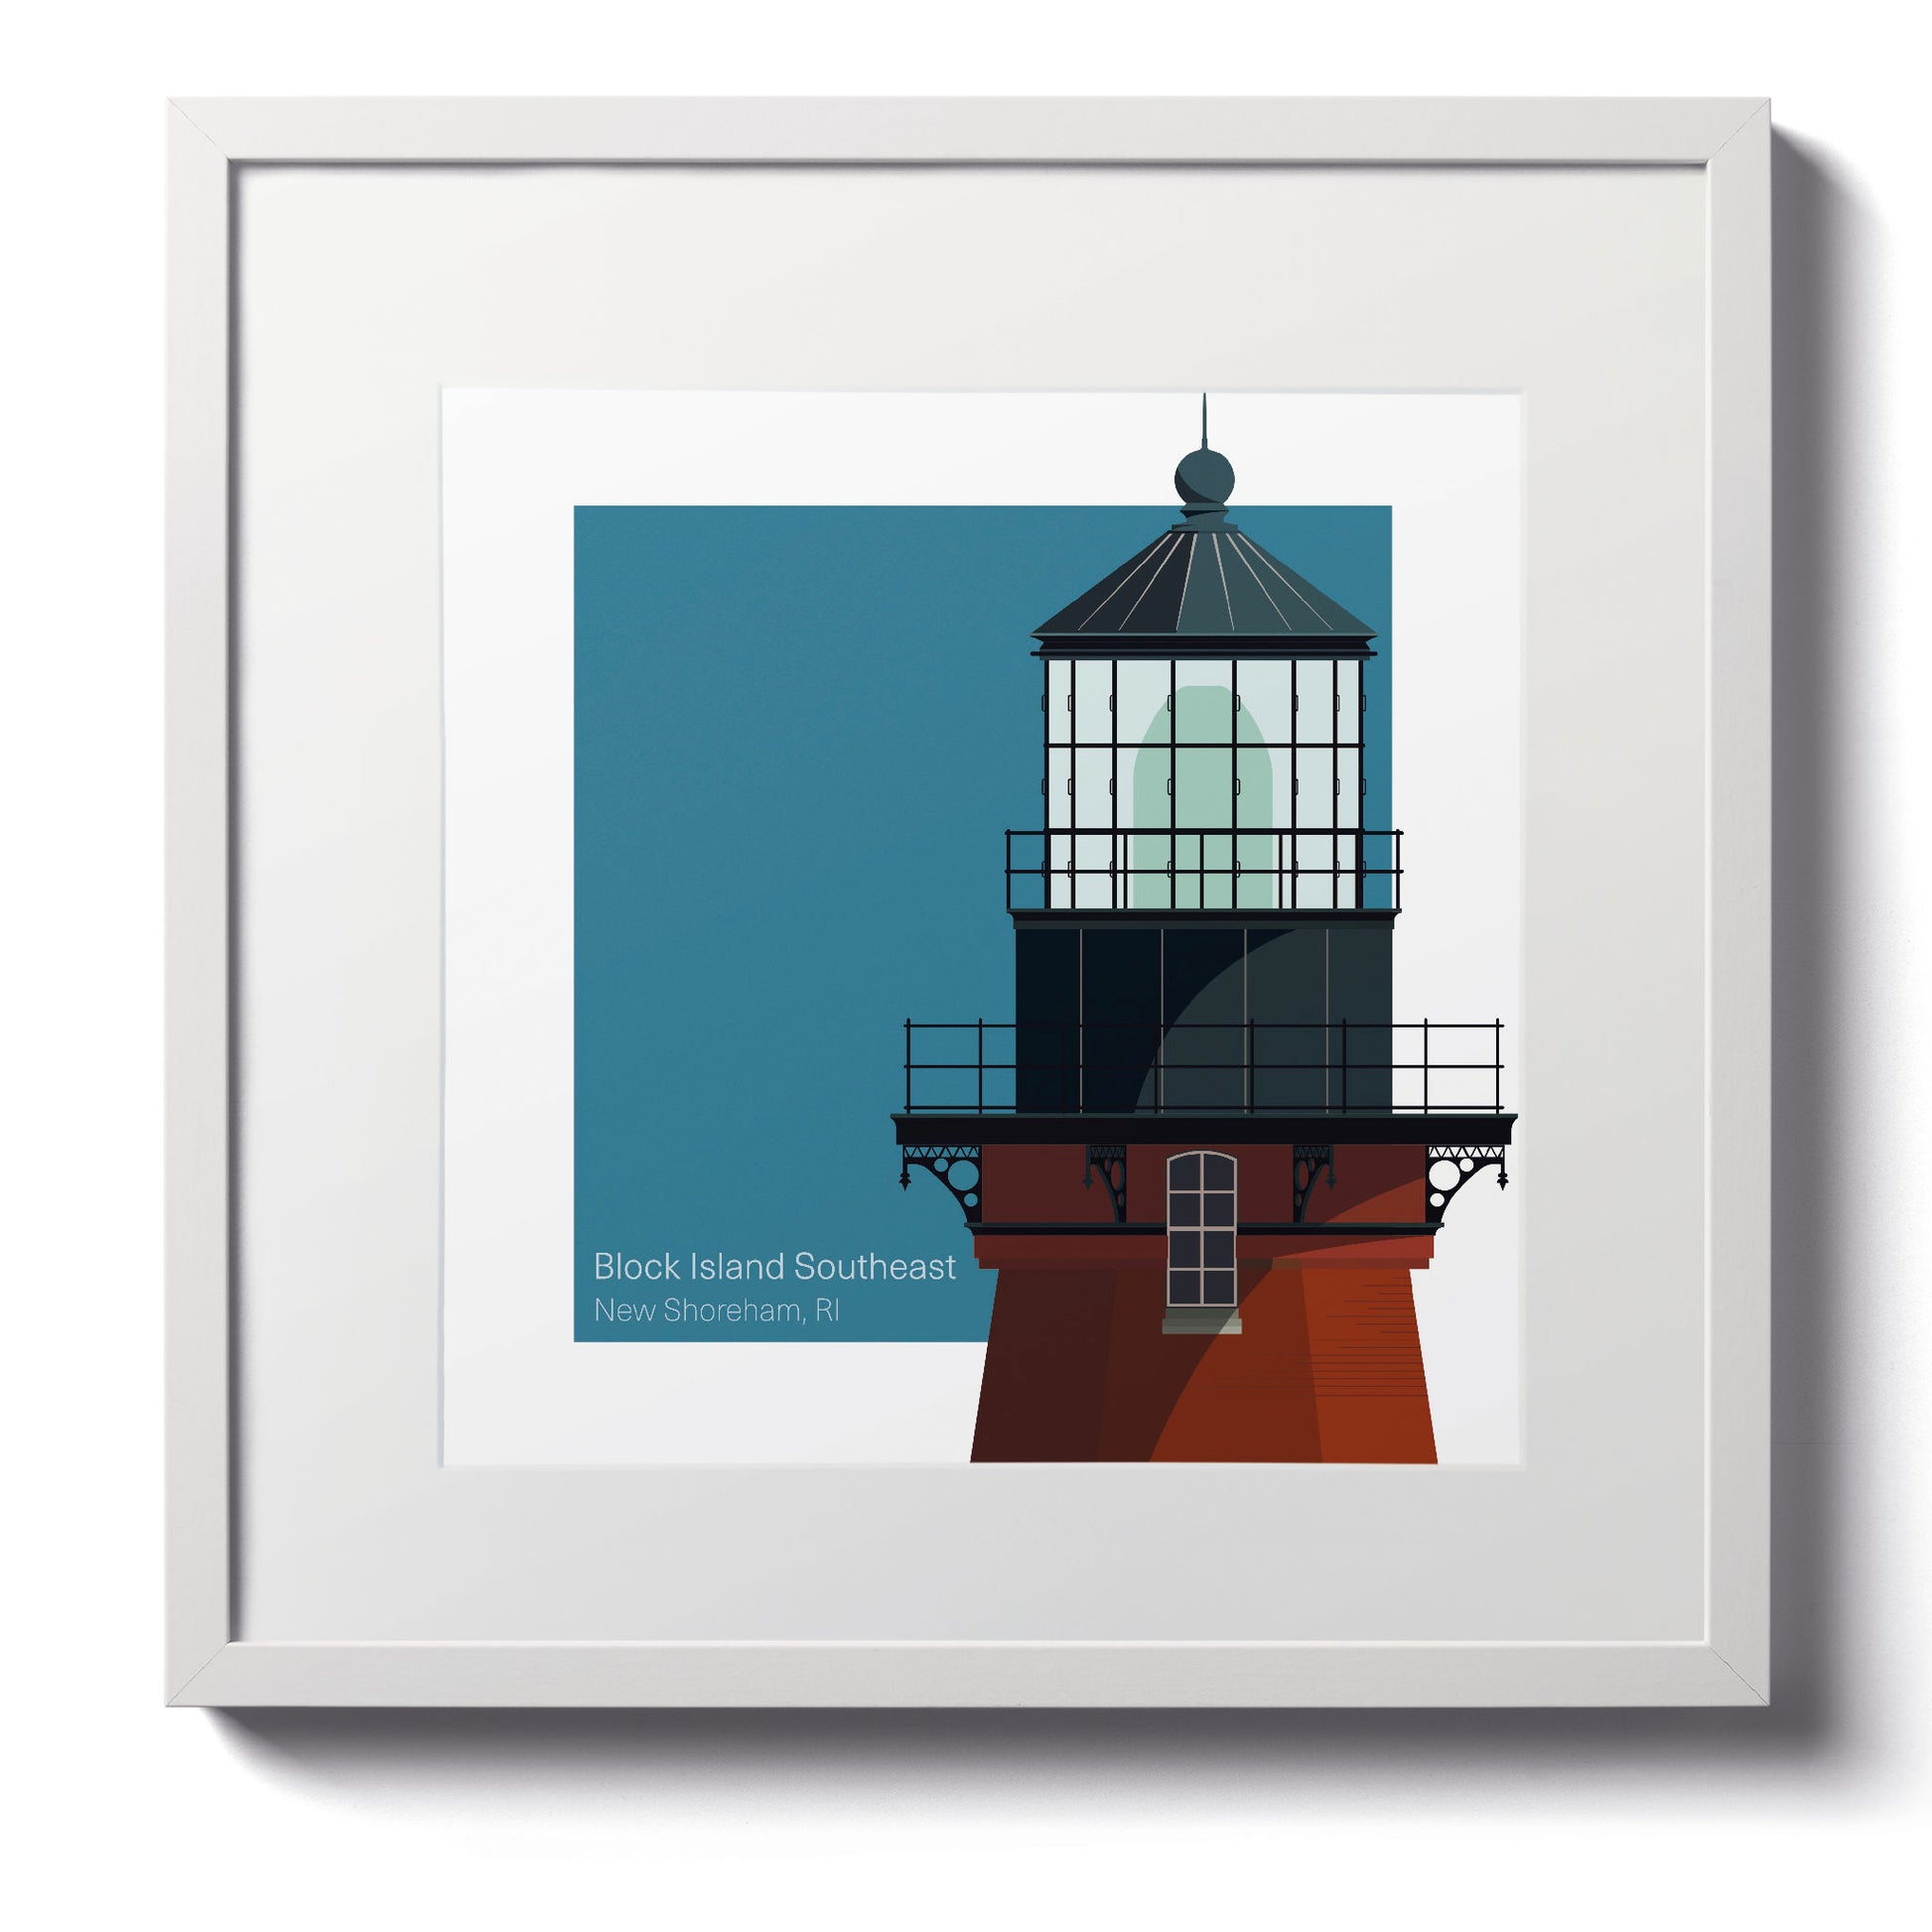 Illustration of the Block Island Southeast lighthouse, RI, USA. On a white background with aqua blue square as a backdrop., in a white frame  and measuring 12"x12" (30x30cm).